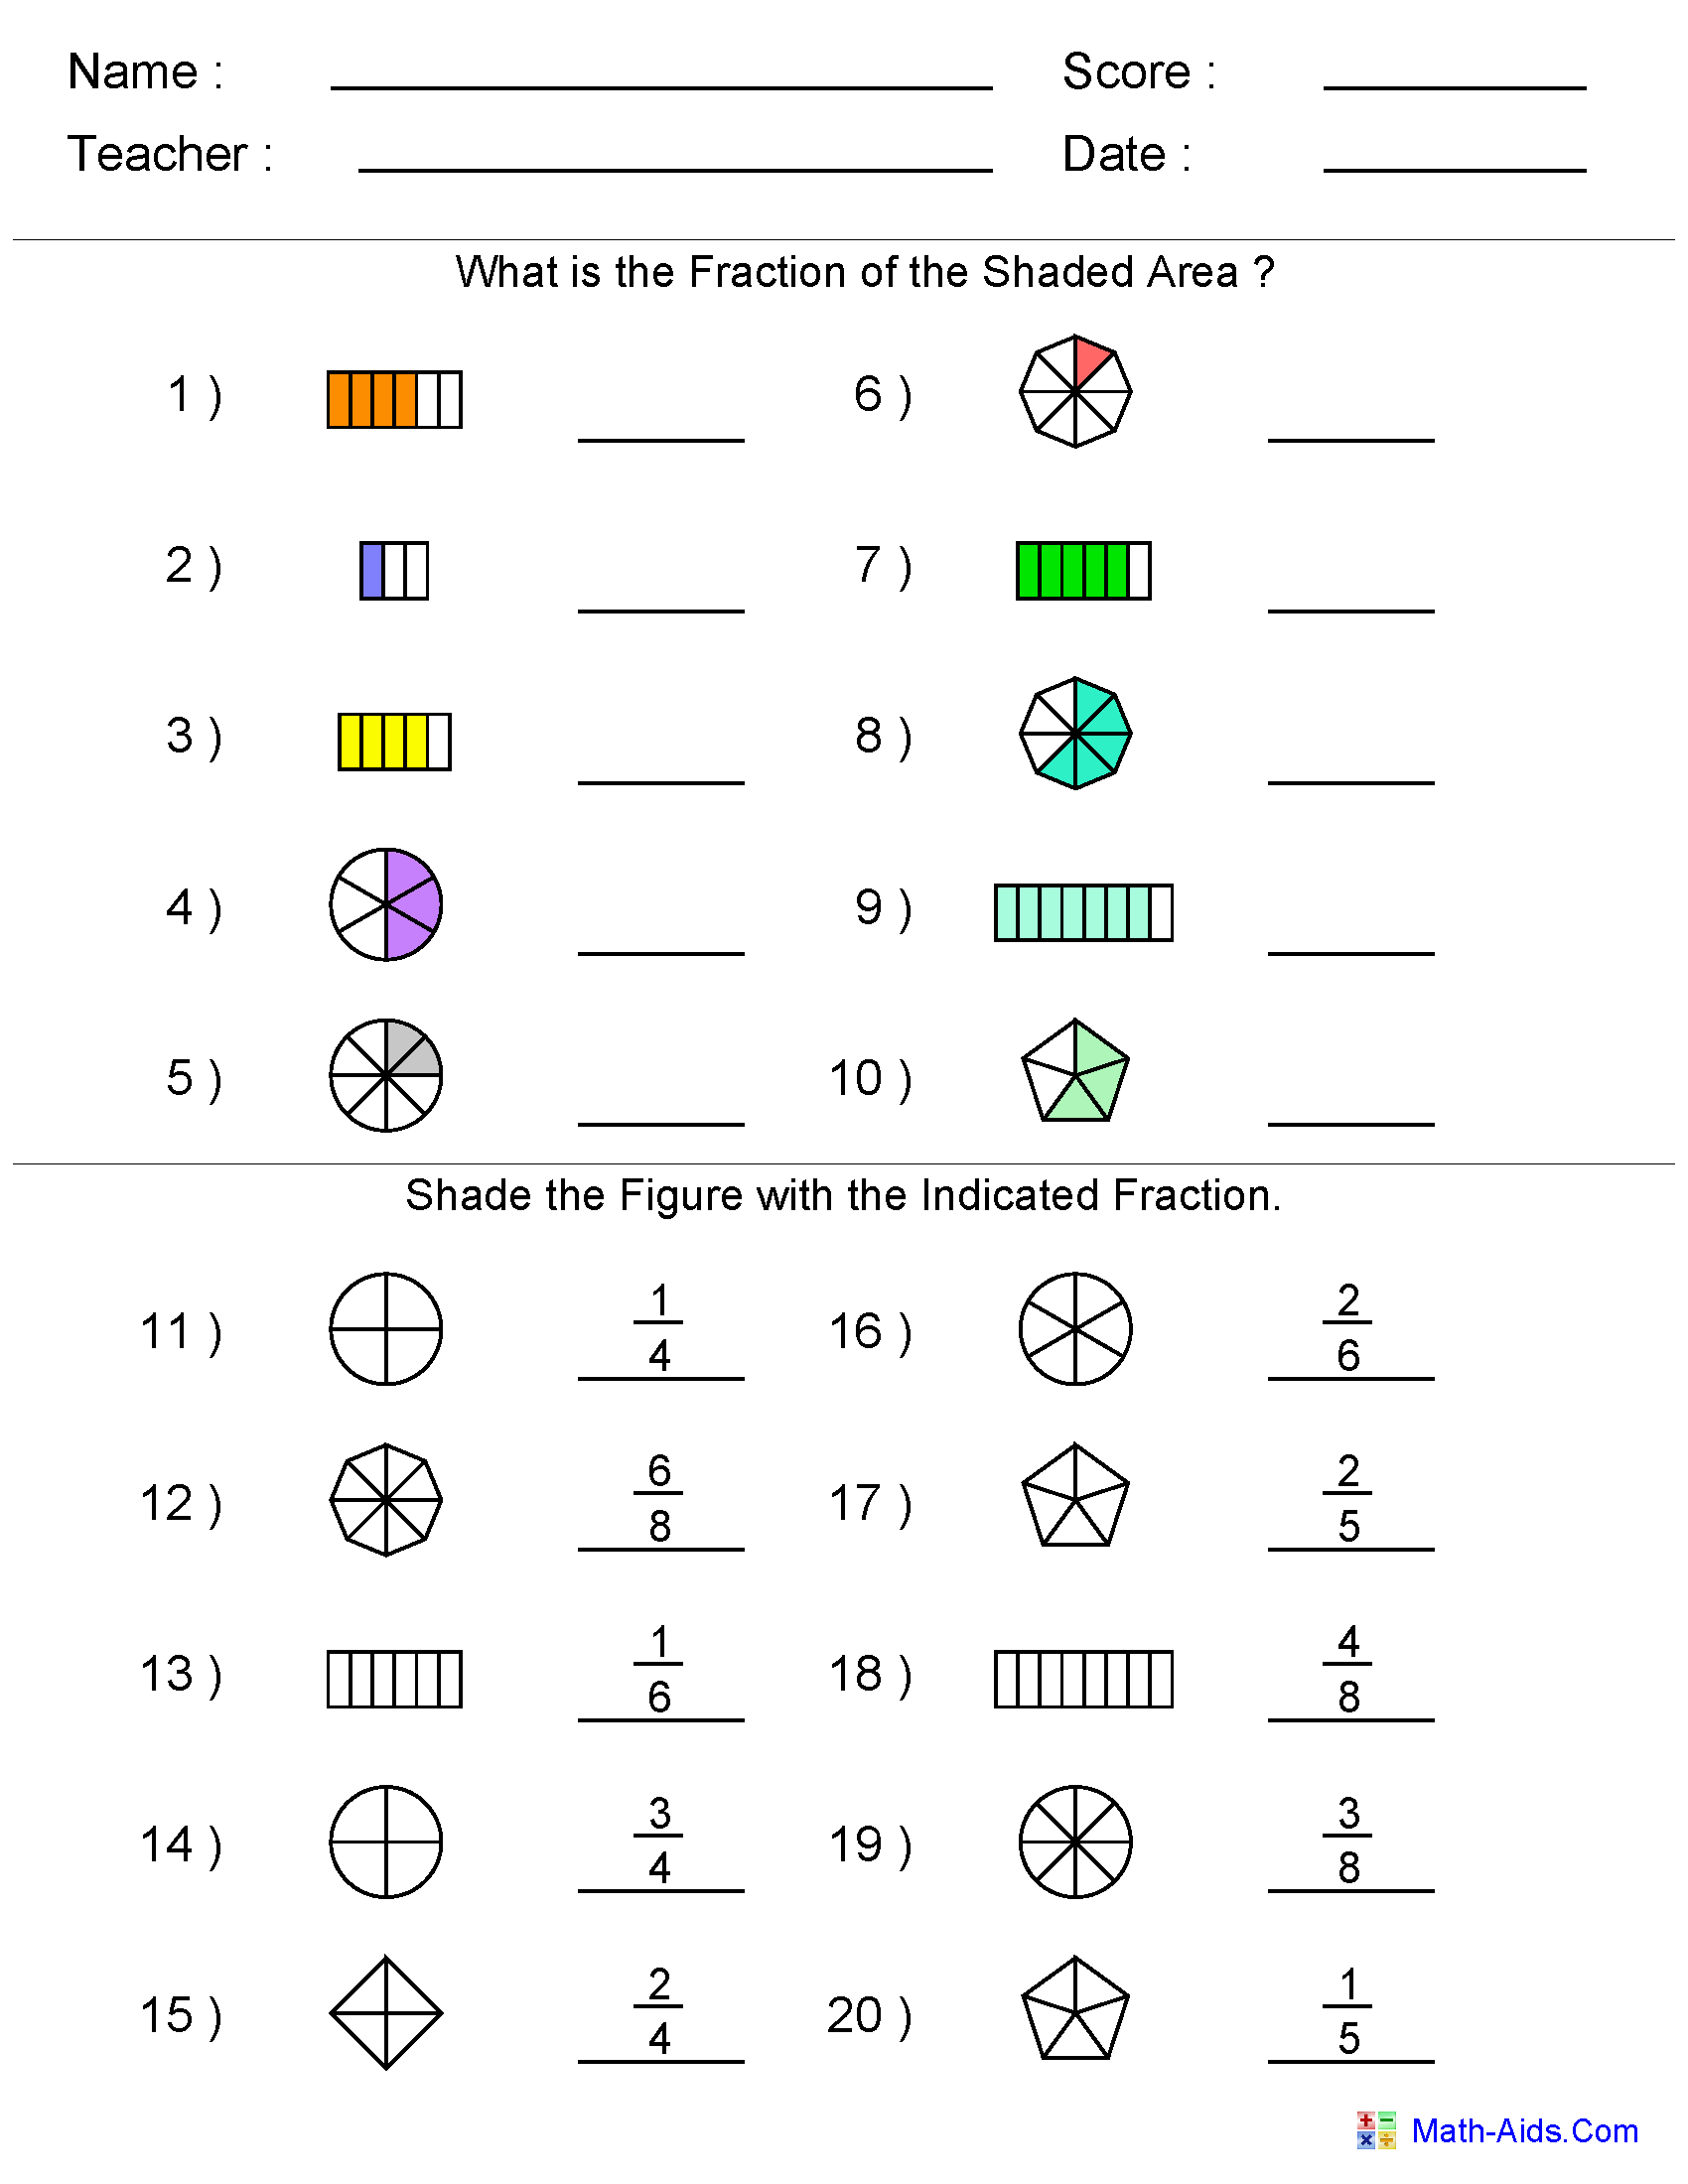 printable-multiplication-of-fractions-printable-multiplication-flash-cards